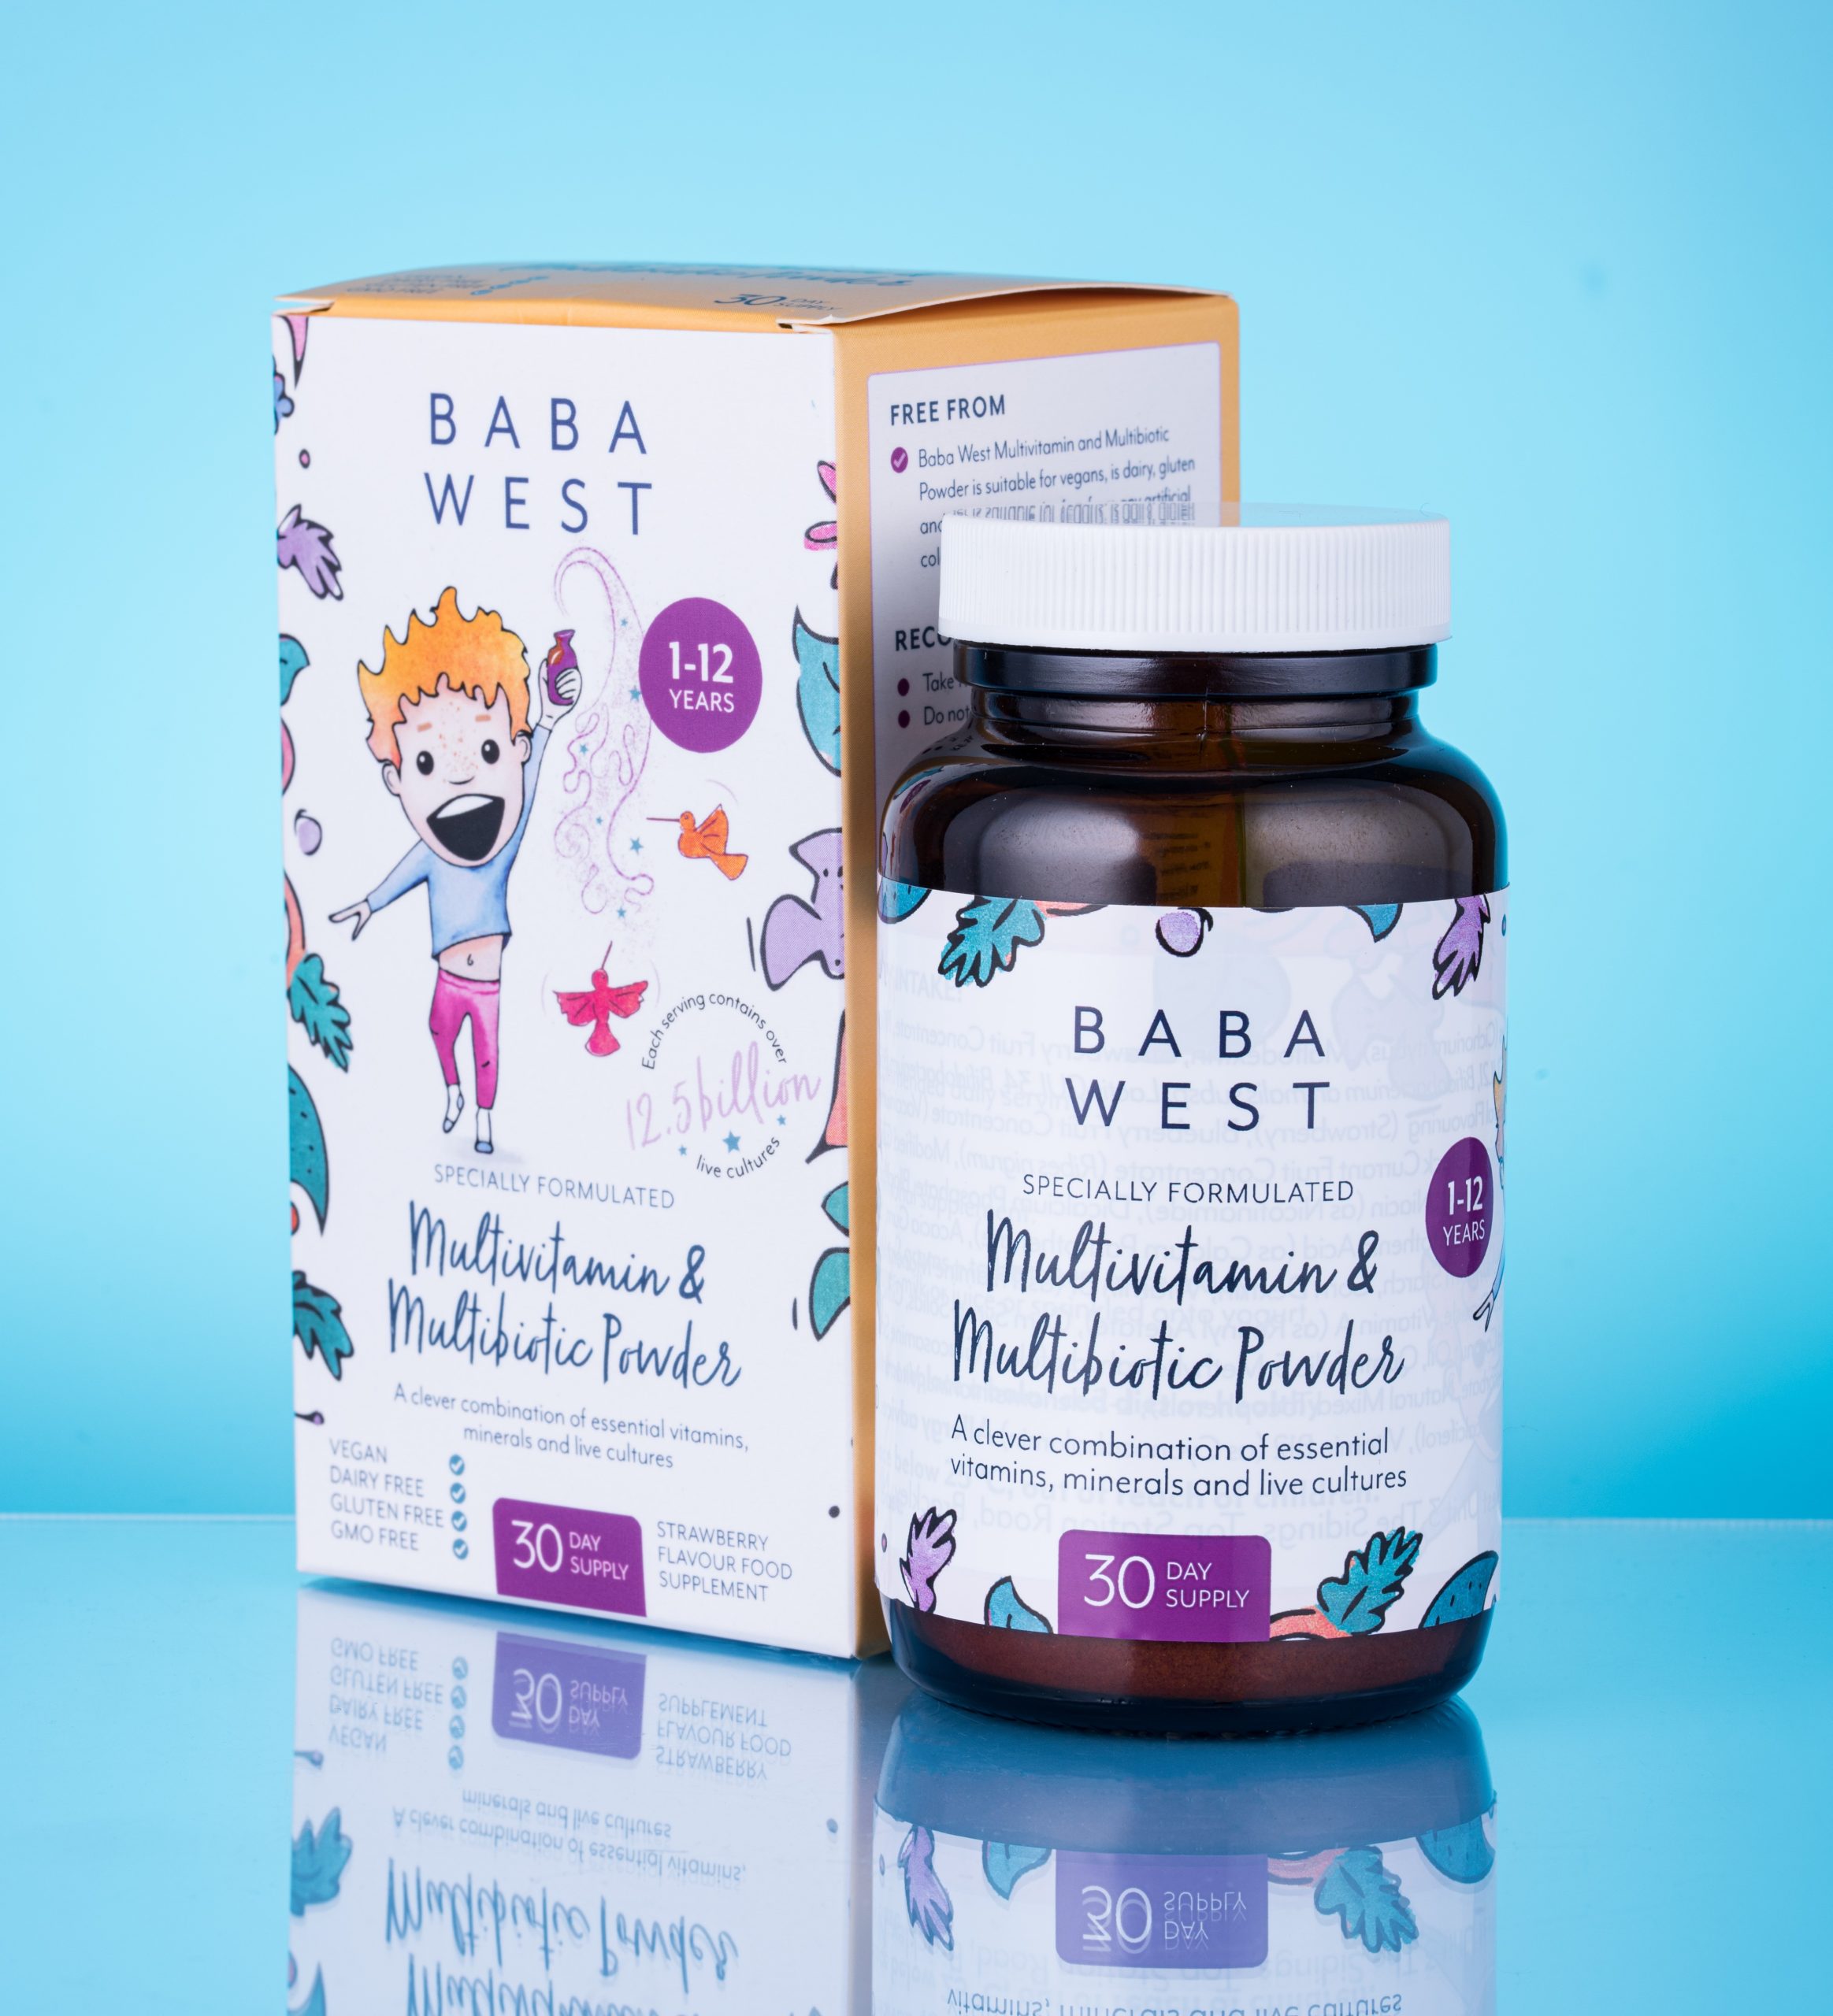 Baba West Multivitamin & Multibiotic Powder for age 1-12 years